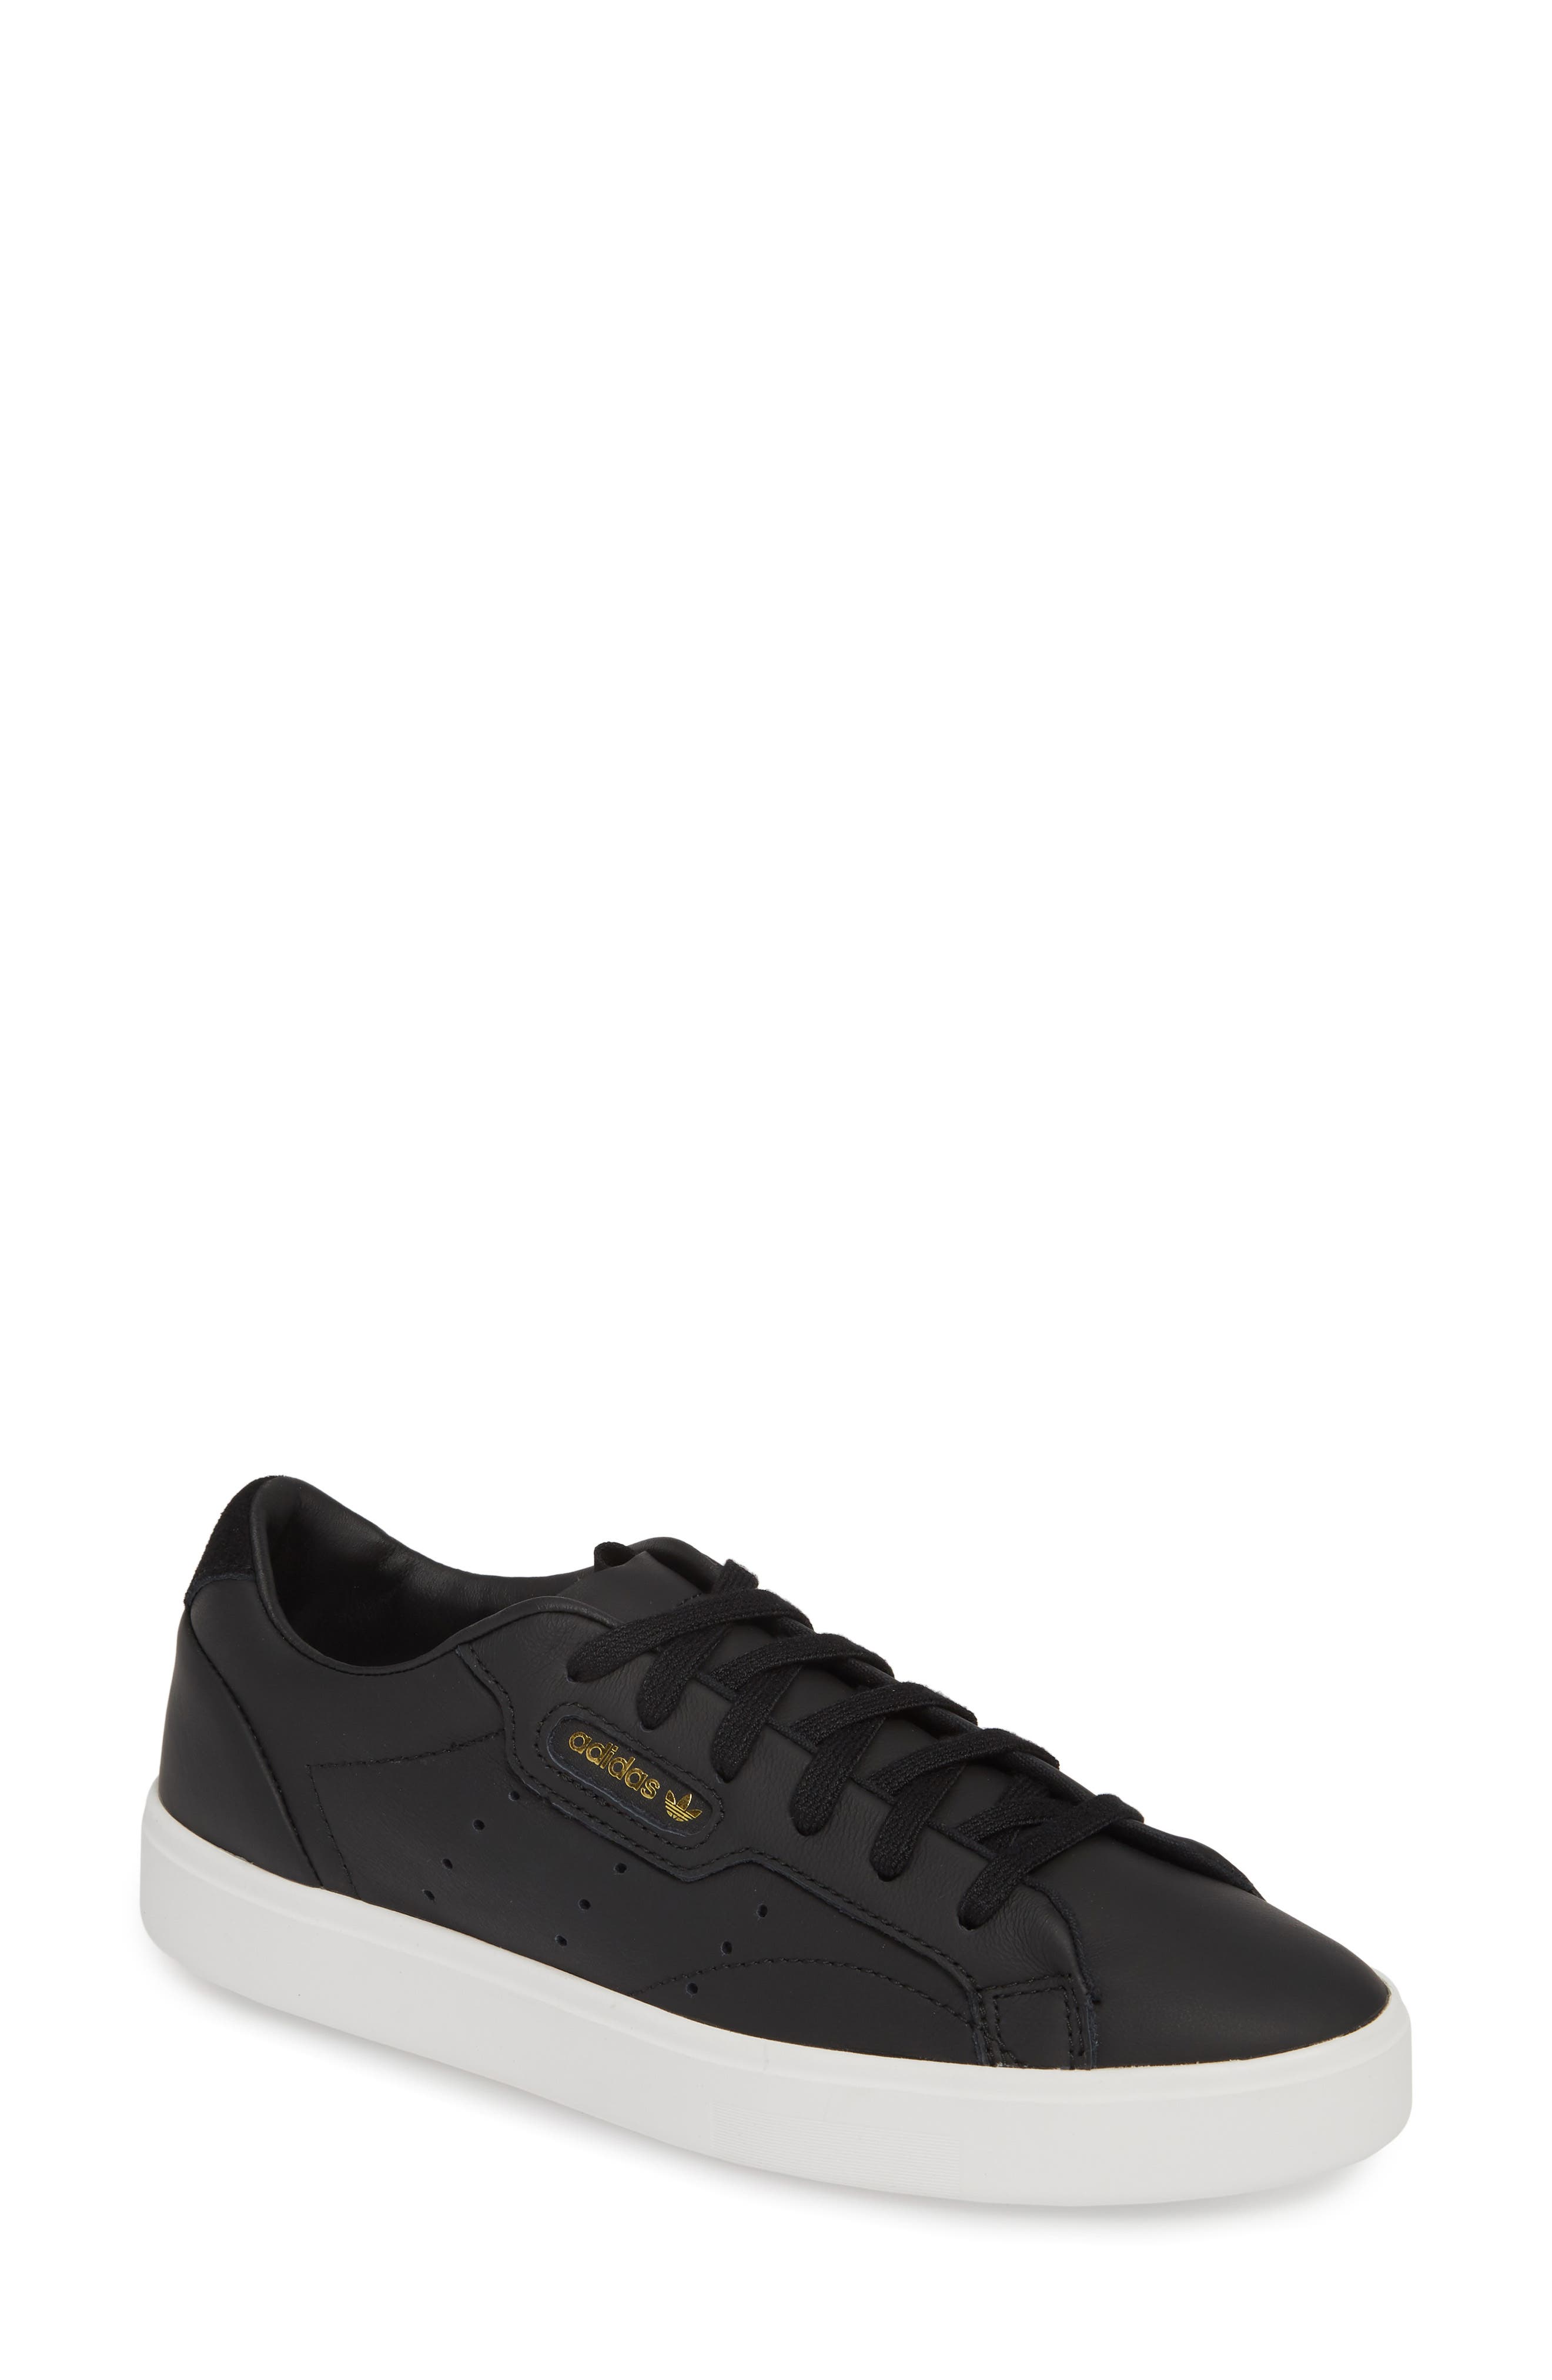 adidas black leather sneakers womens